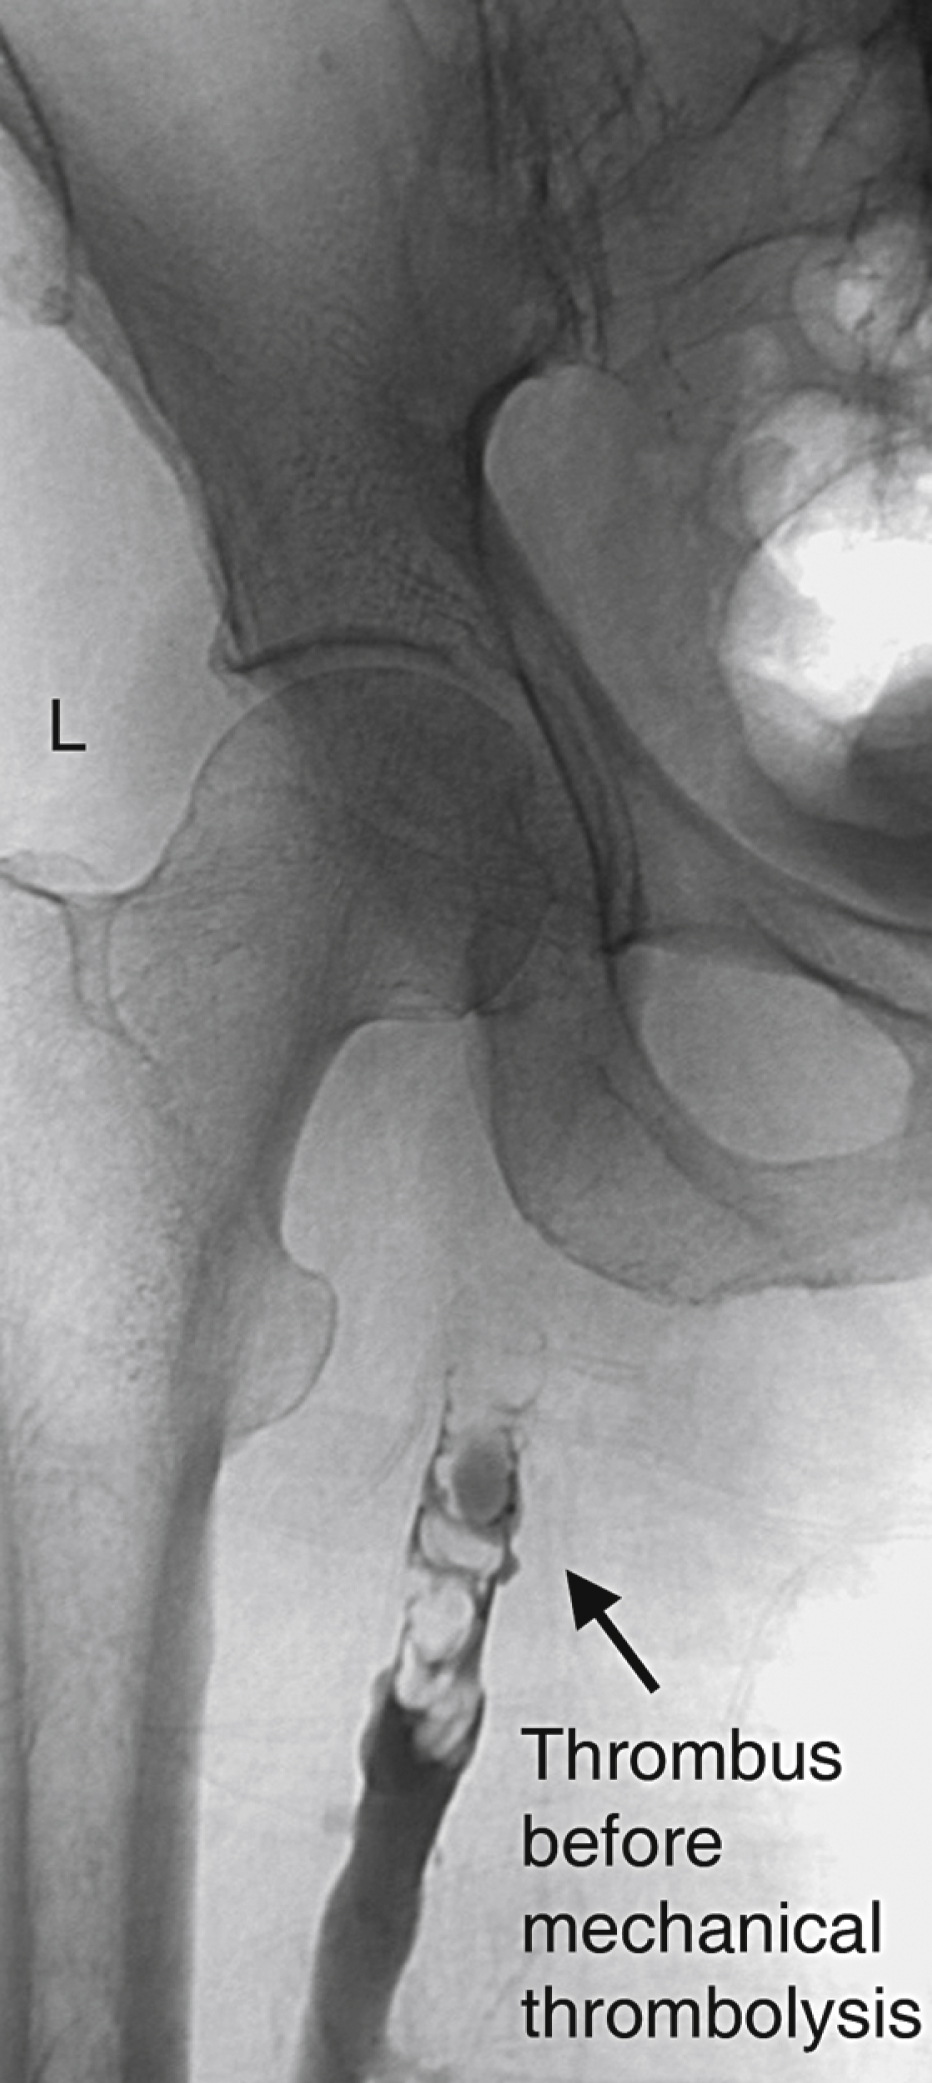 Fig. 70.3, Patient with left-sided ( L ) proximal femoral-to-common iliac vein thrombus. Access has been gained into popliteal vein and contrast medium injected from below, showing thrombus filling proximal portion of femoral vein.